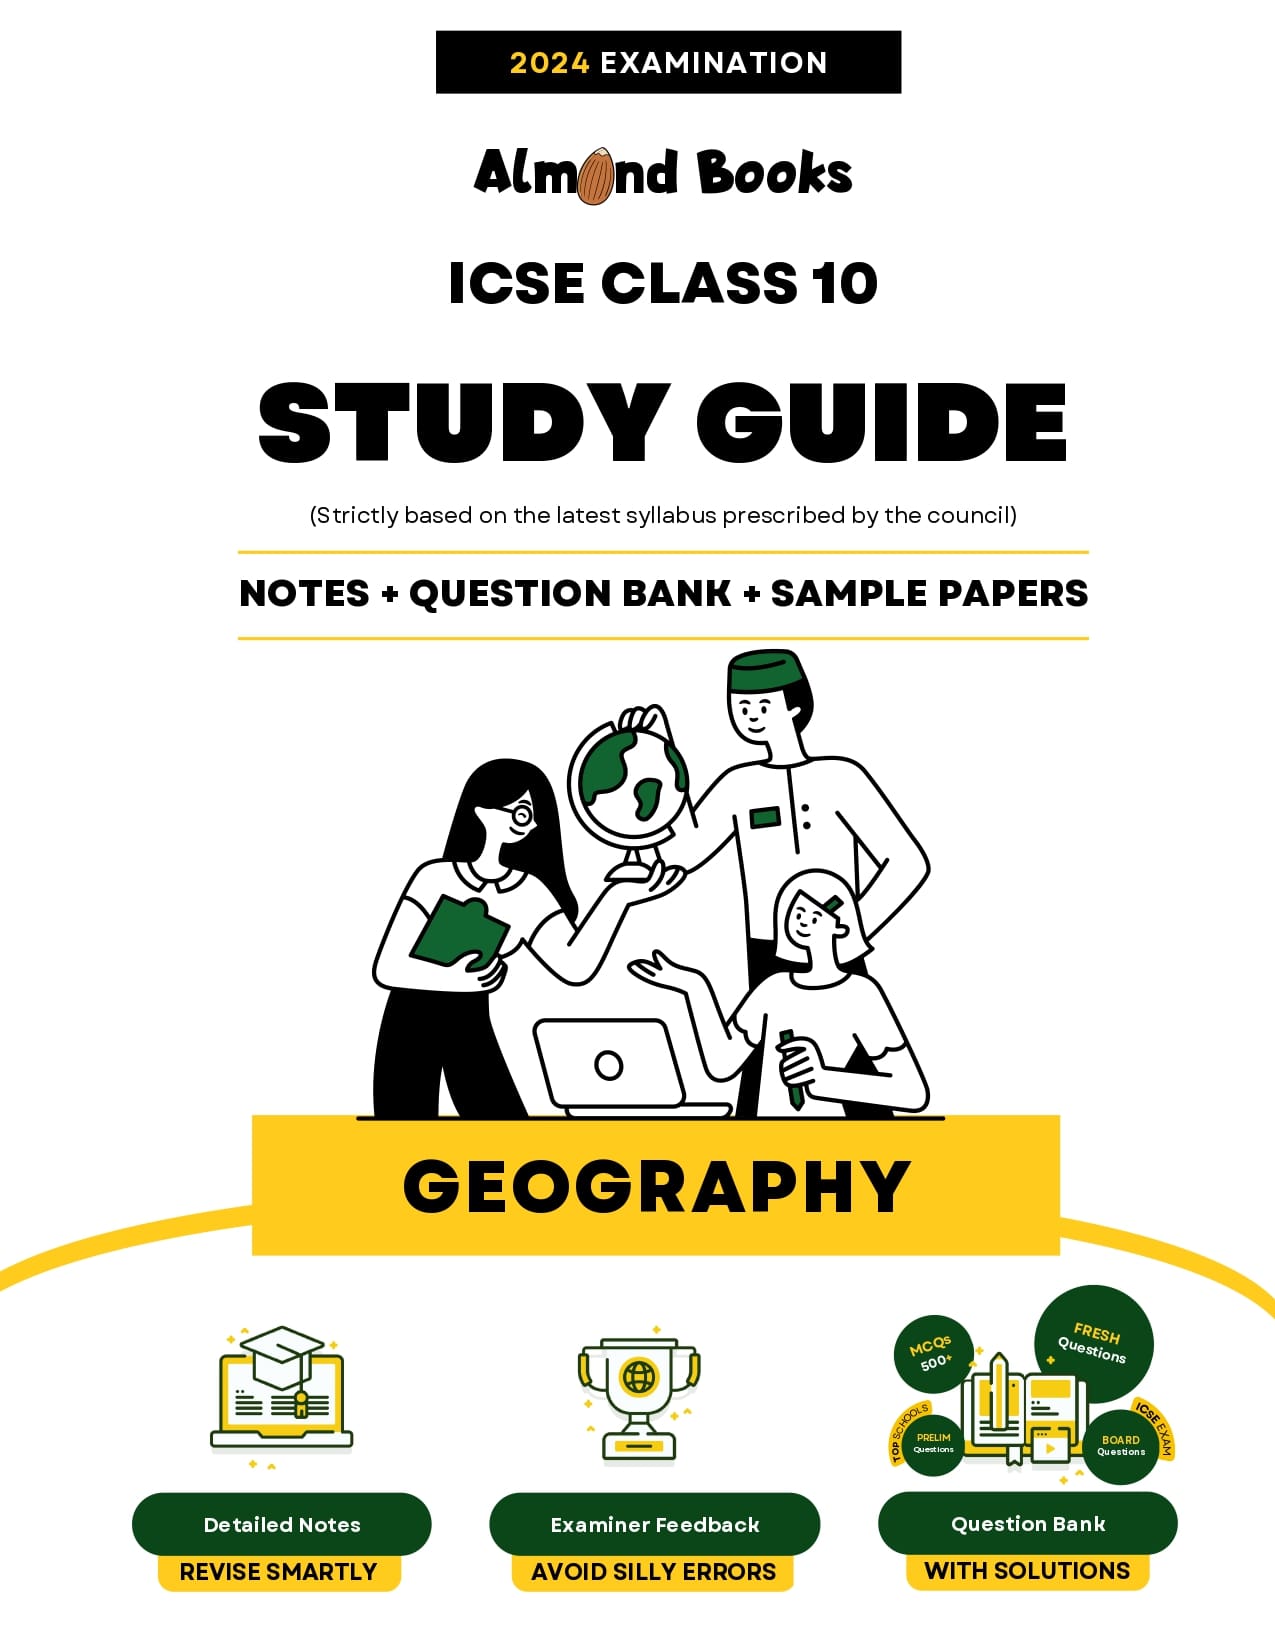 ICSE geography study guide class 10 by almond books